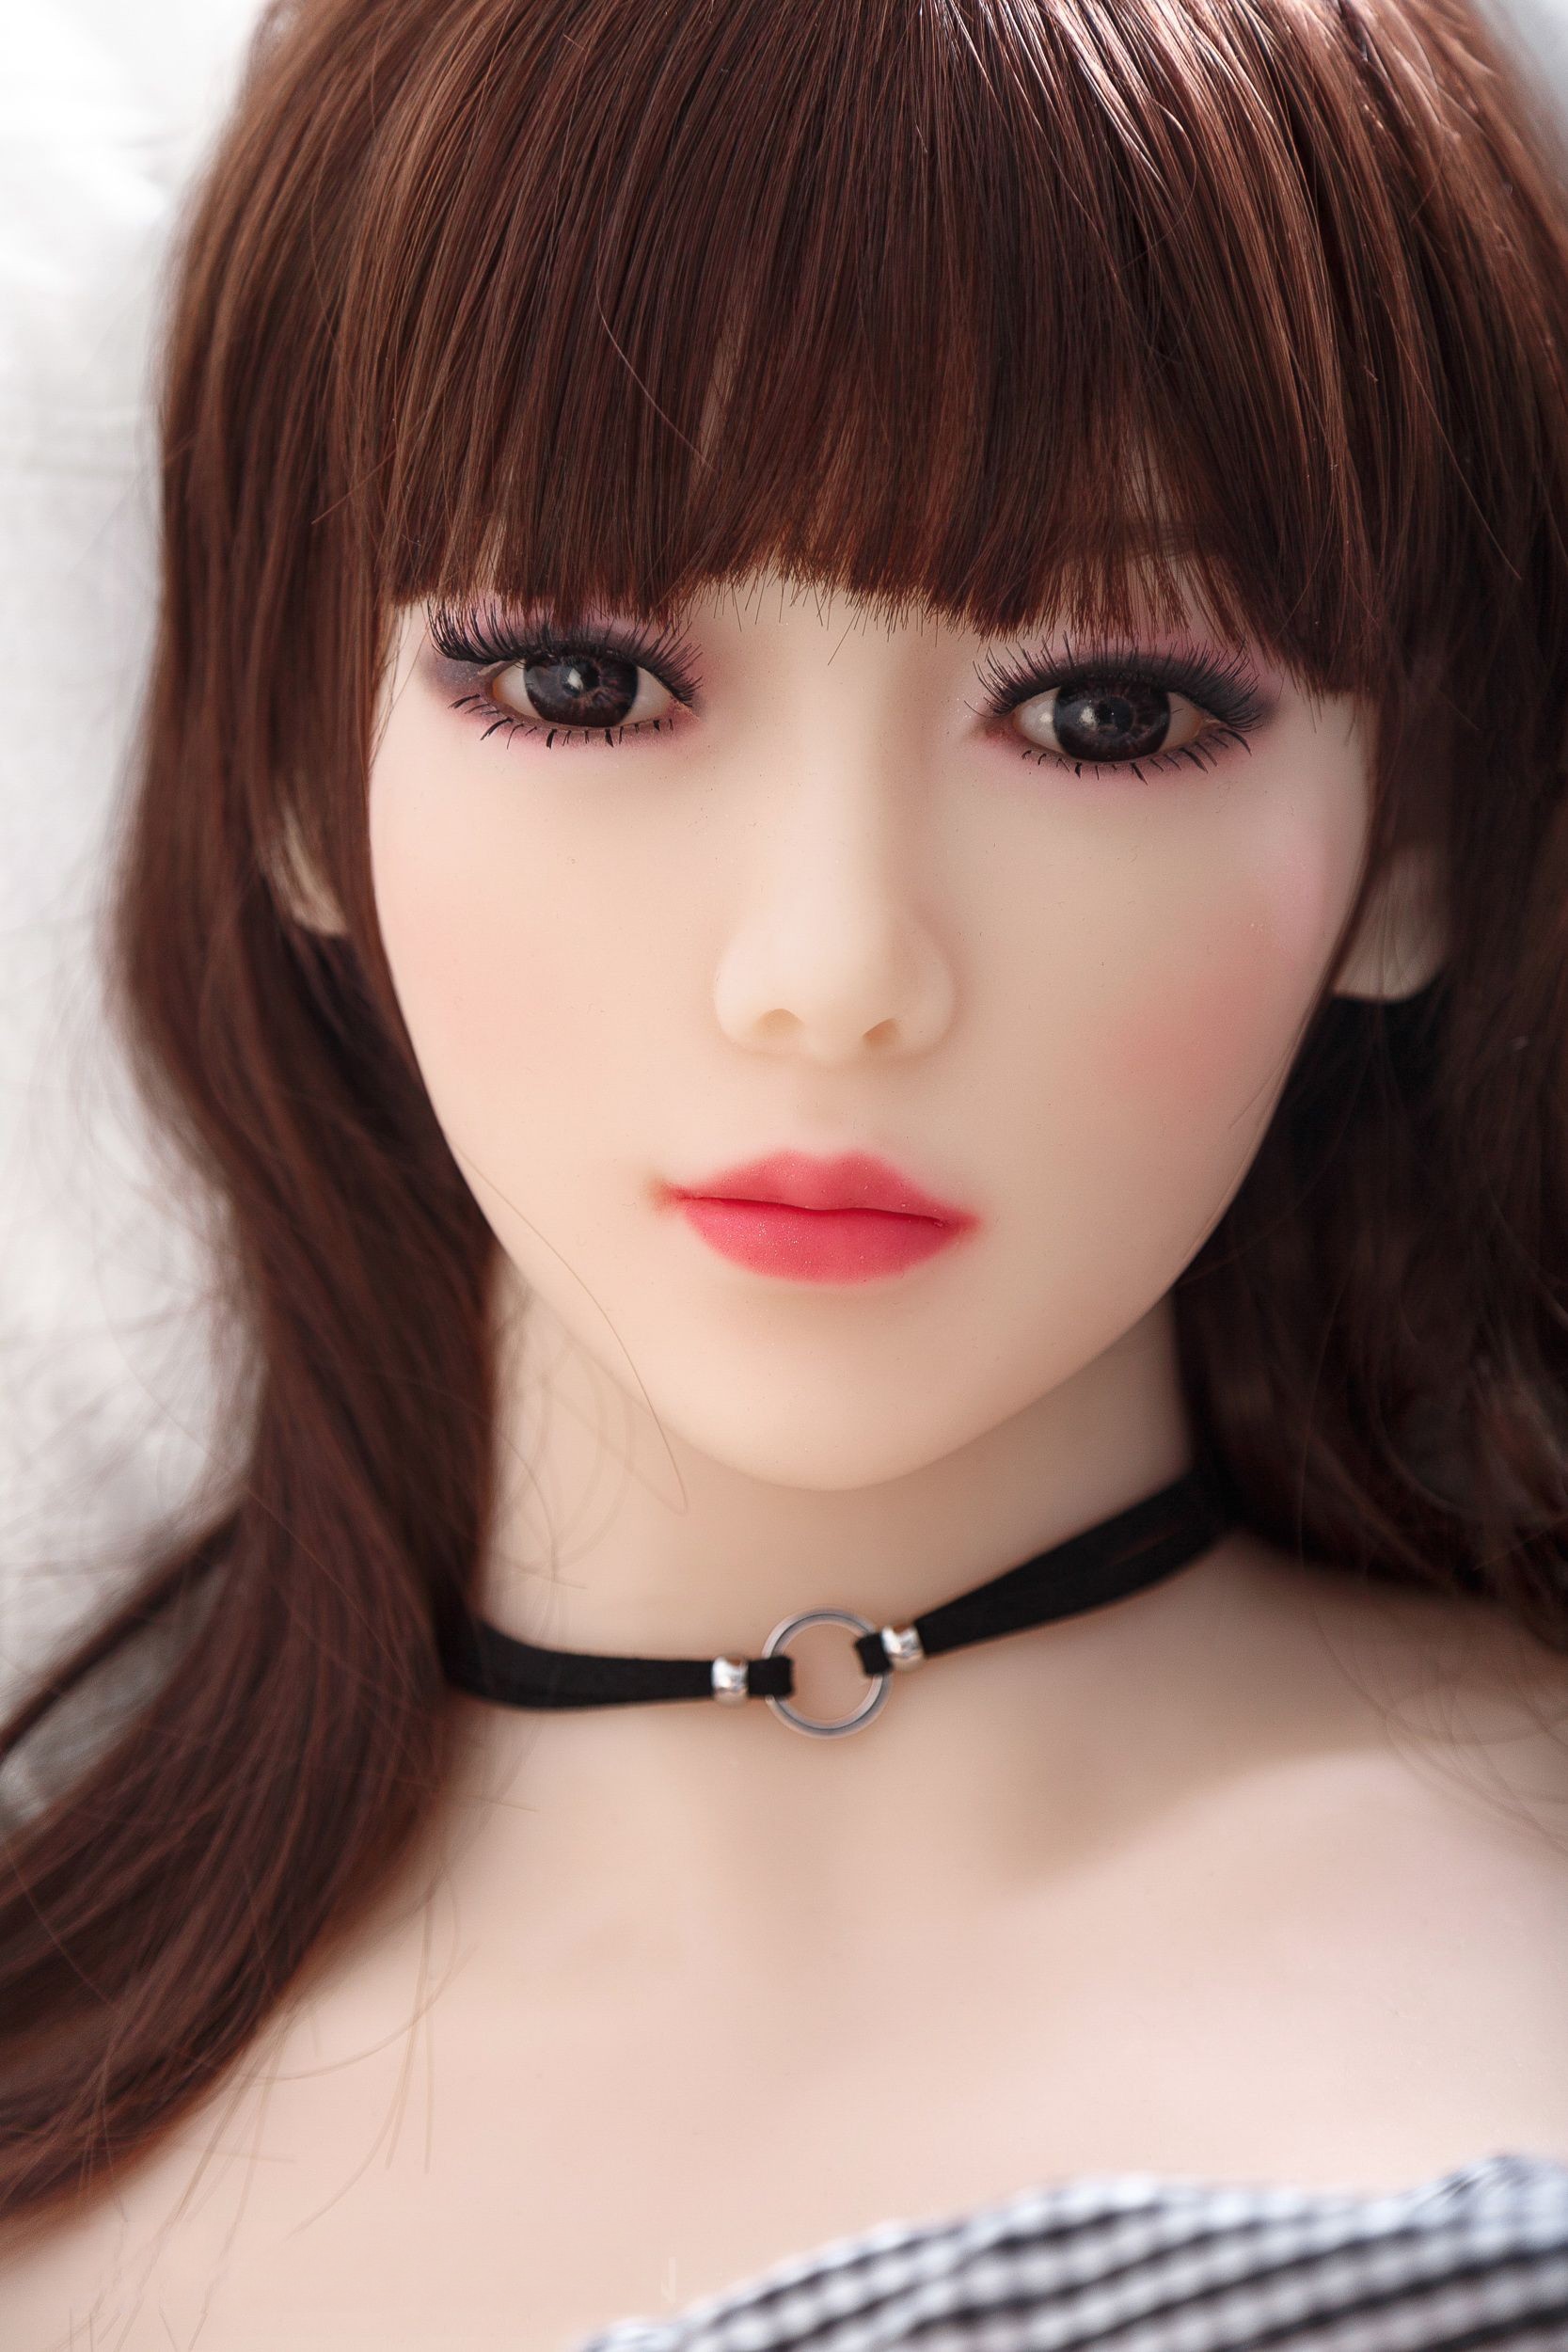 Exquisite GesichtszÃ¼ge real doll puppe